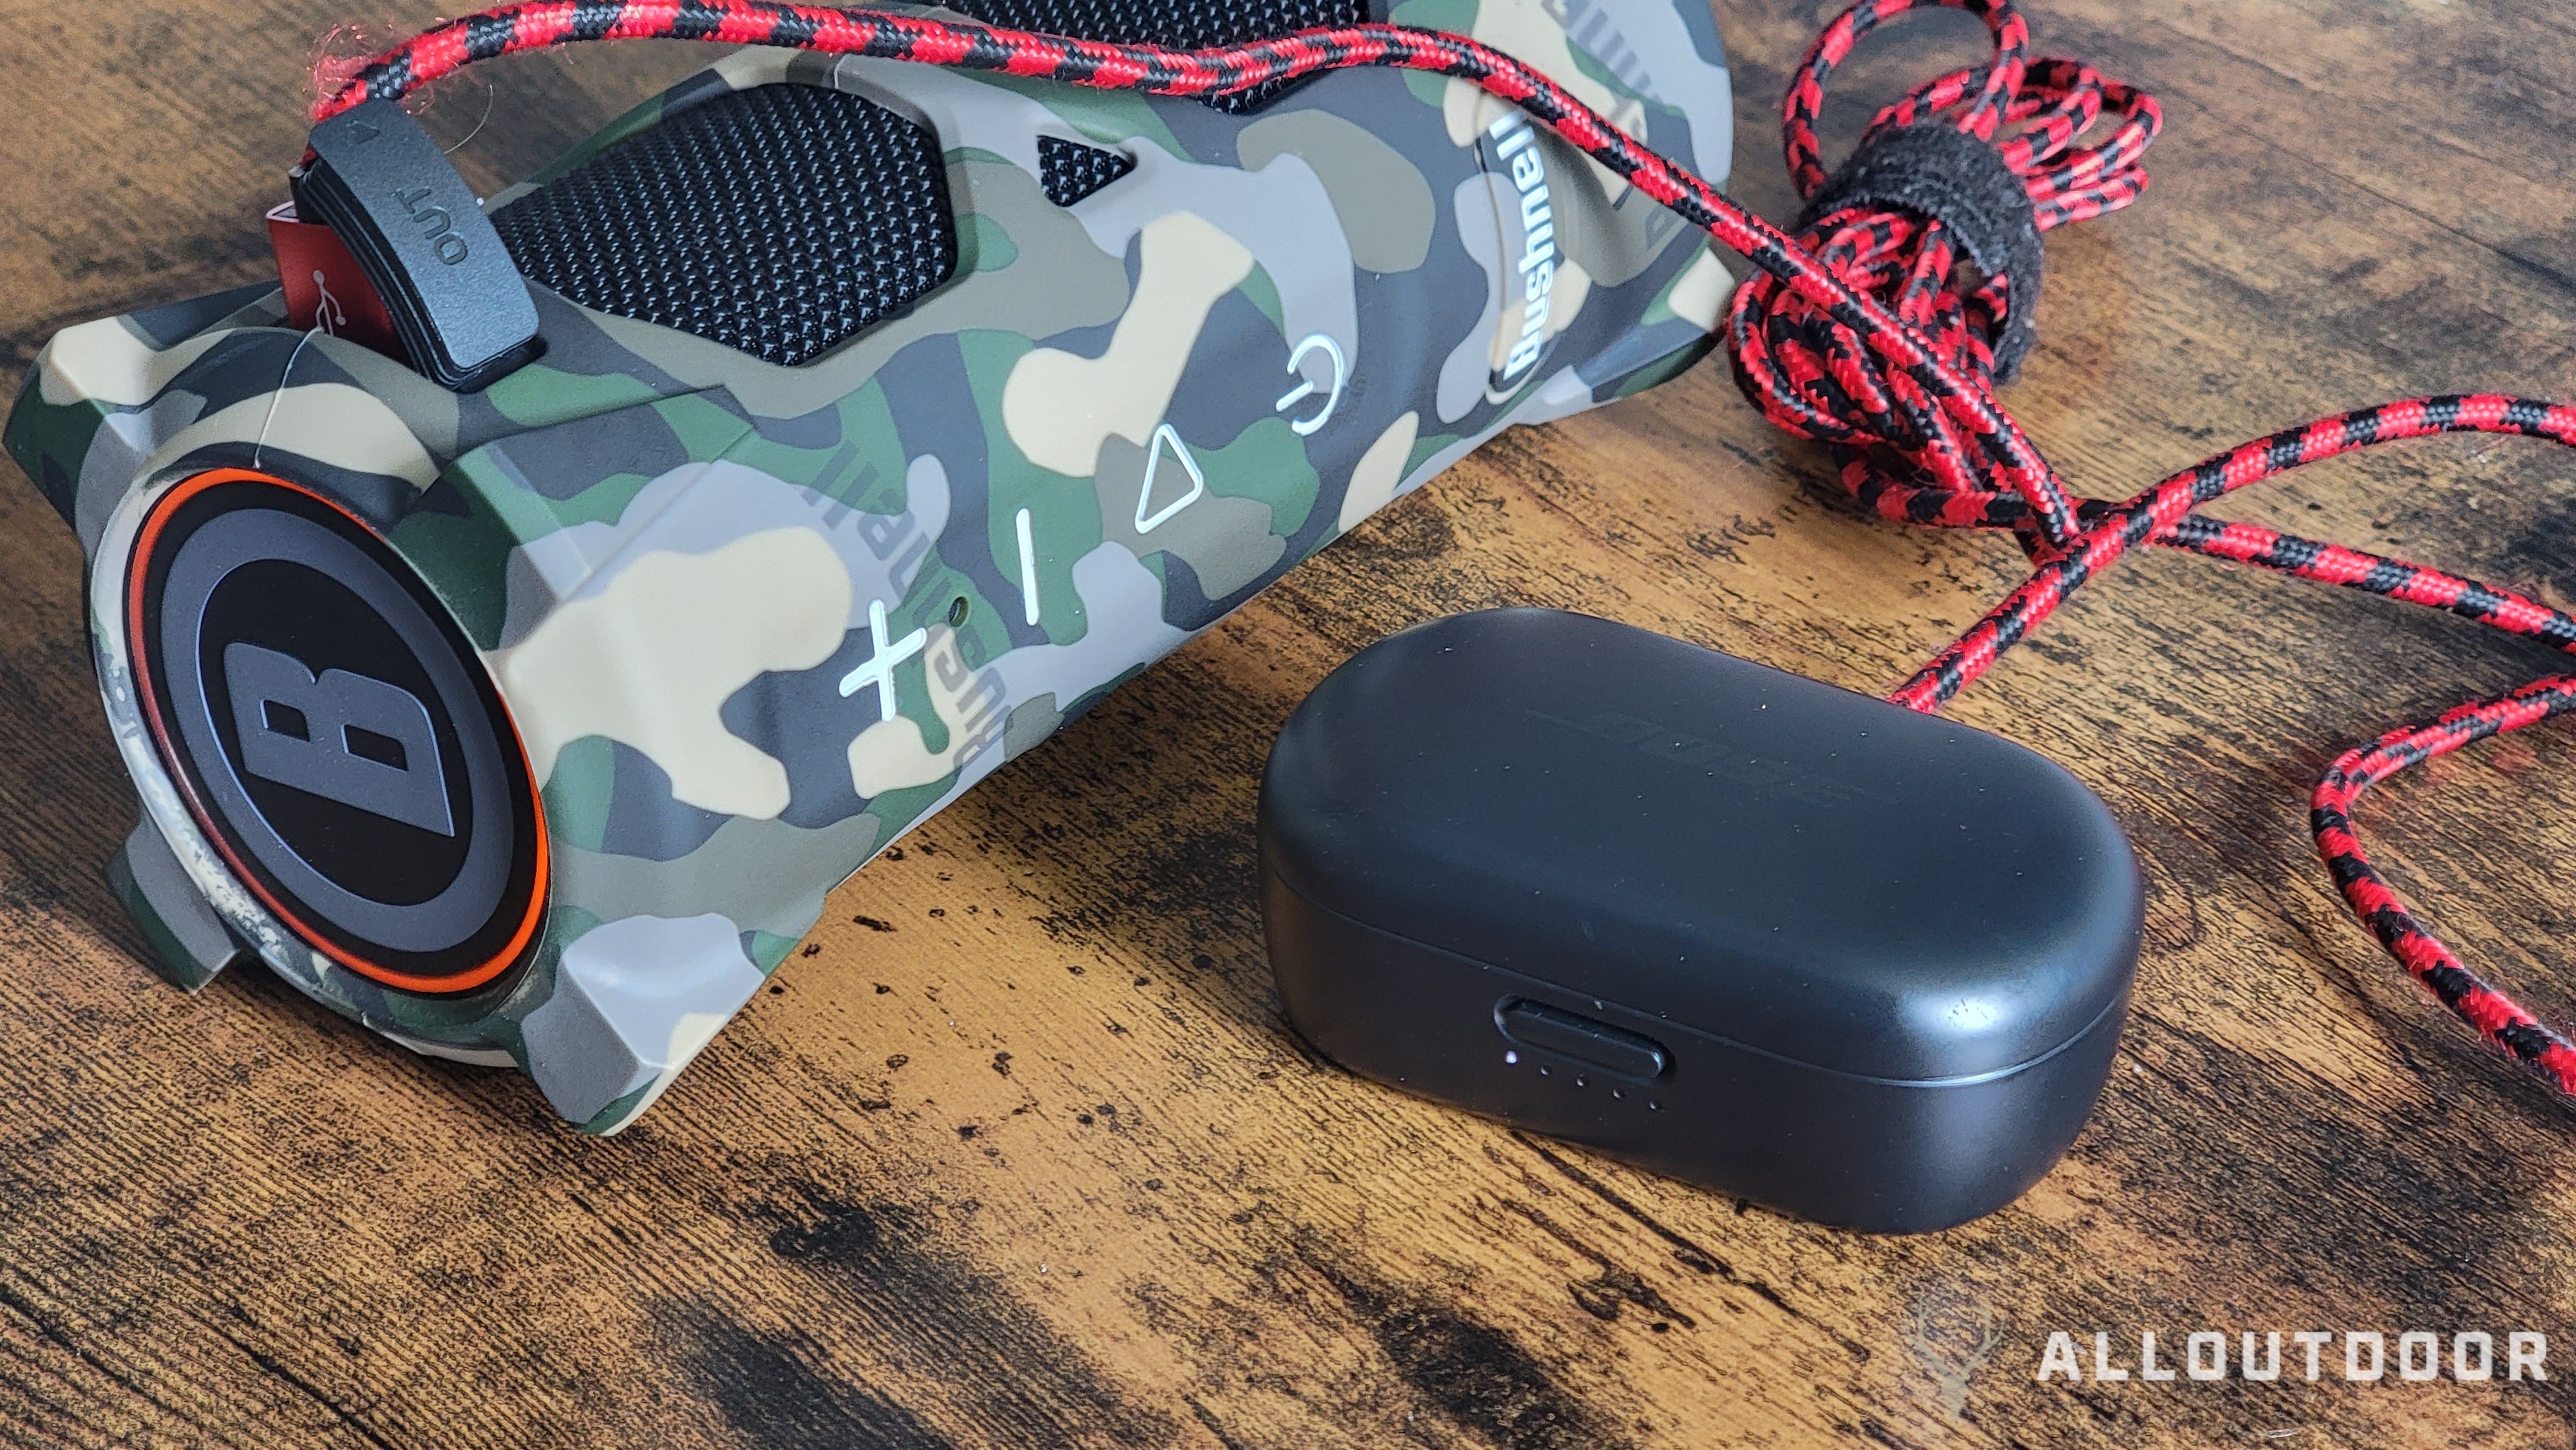 AOD Review: The Bushnell Outdoorsman Bluetooth Speaker